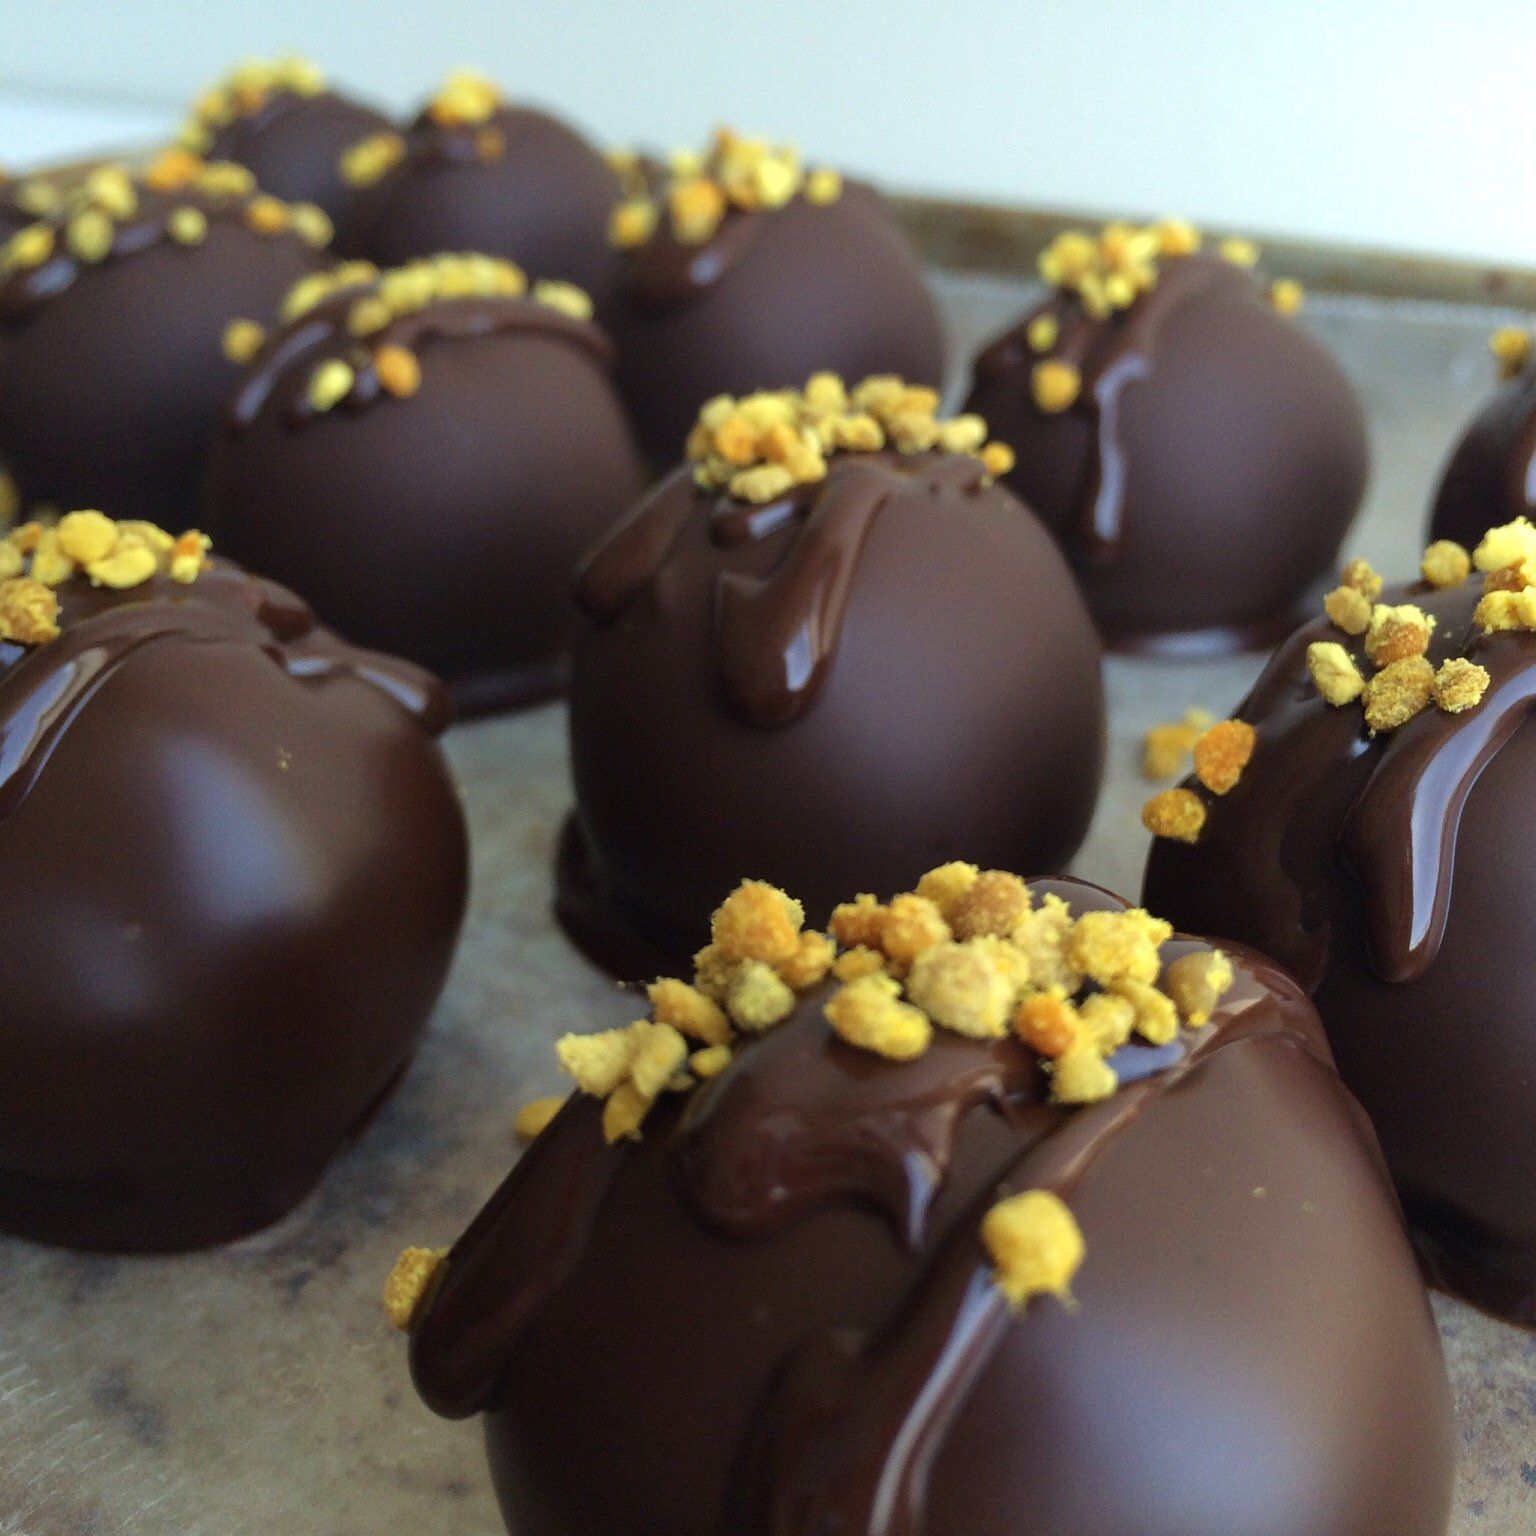 Chocolate-coated superfood truffles with JOYÀ chocolate and Bliss cacao elixir